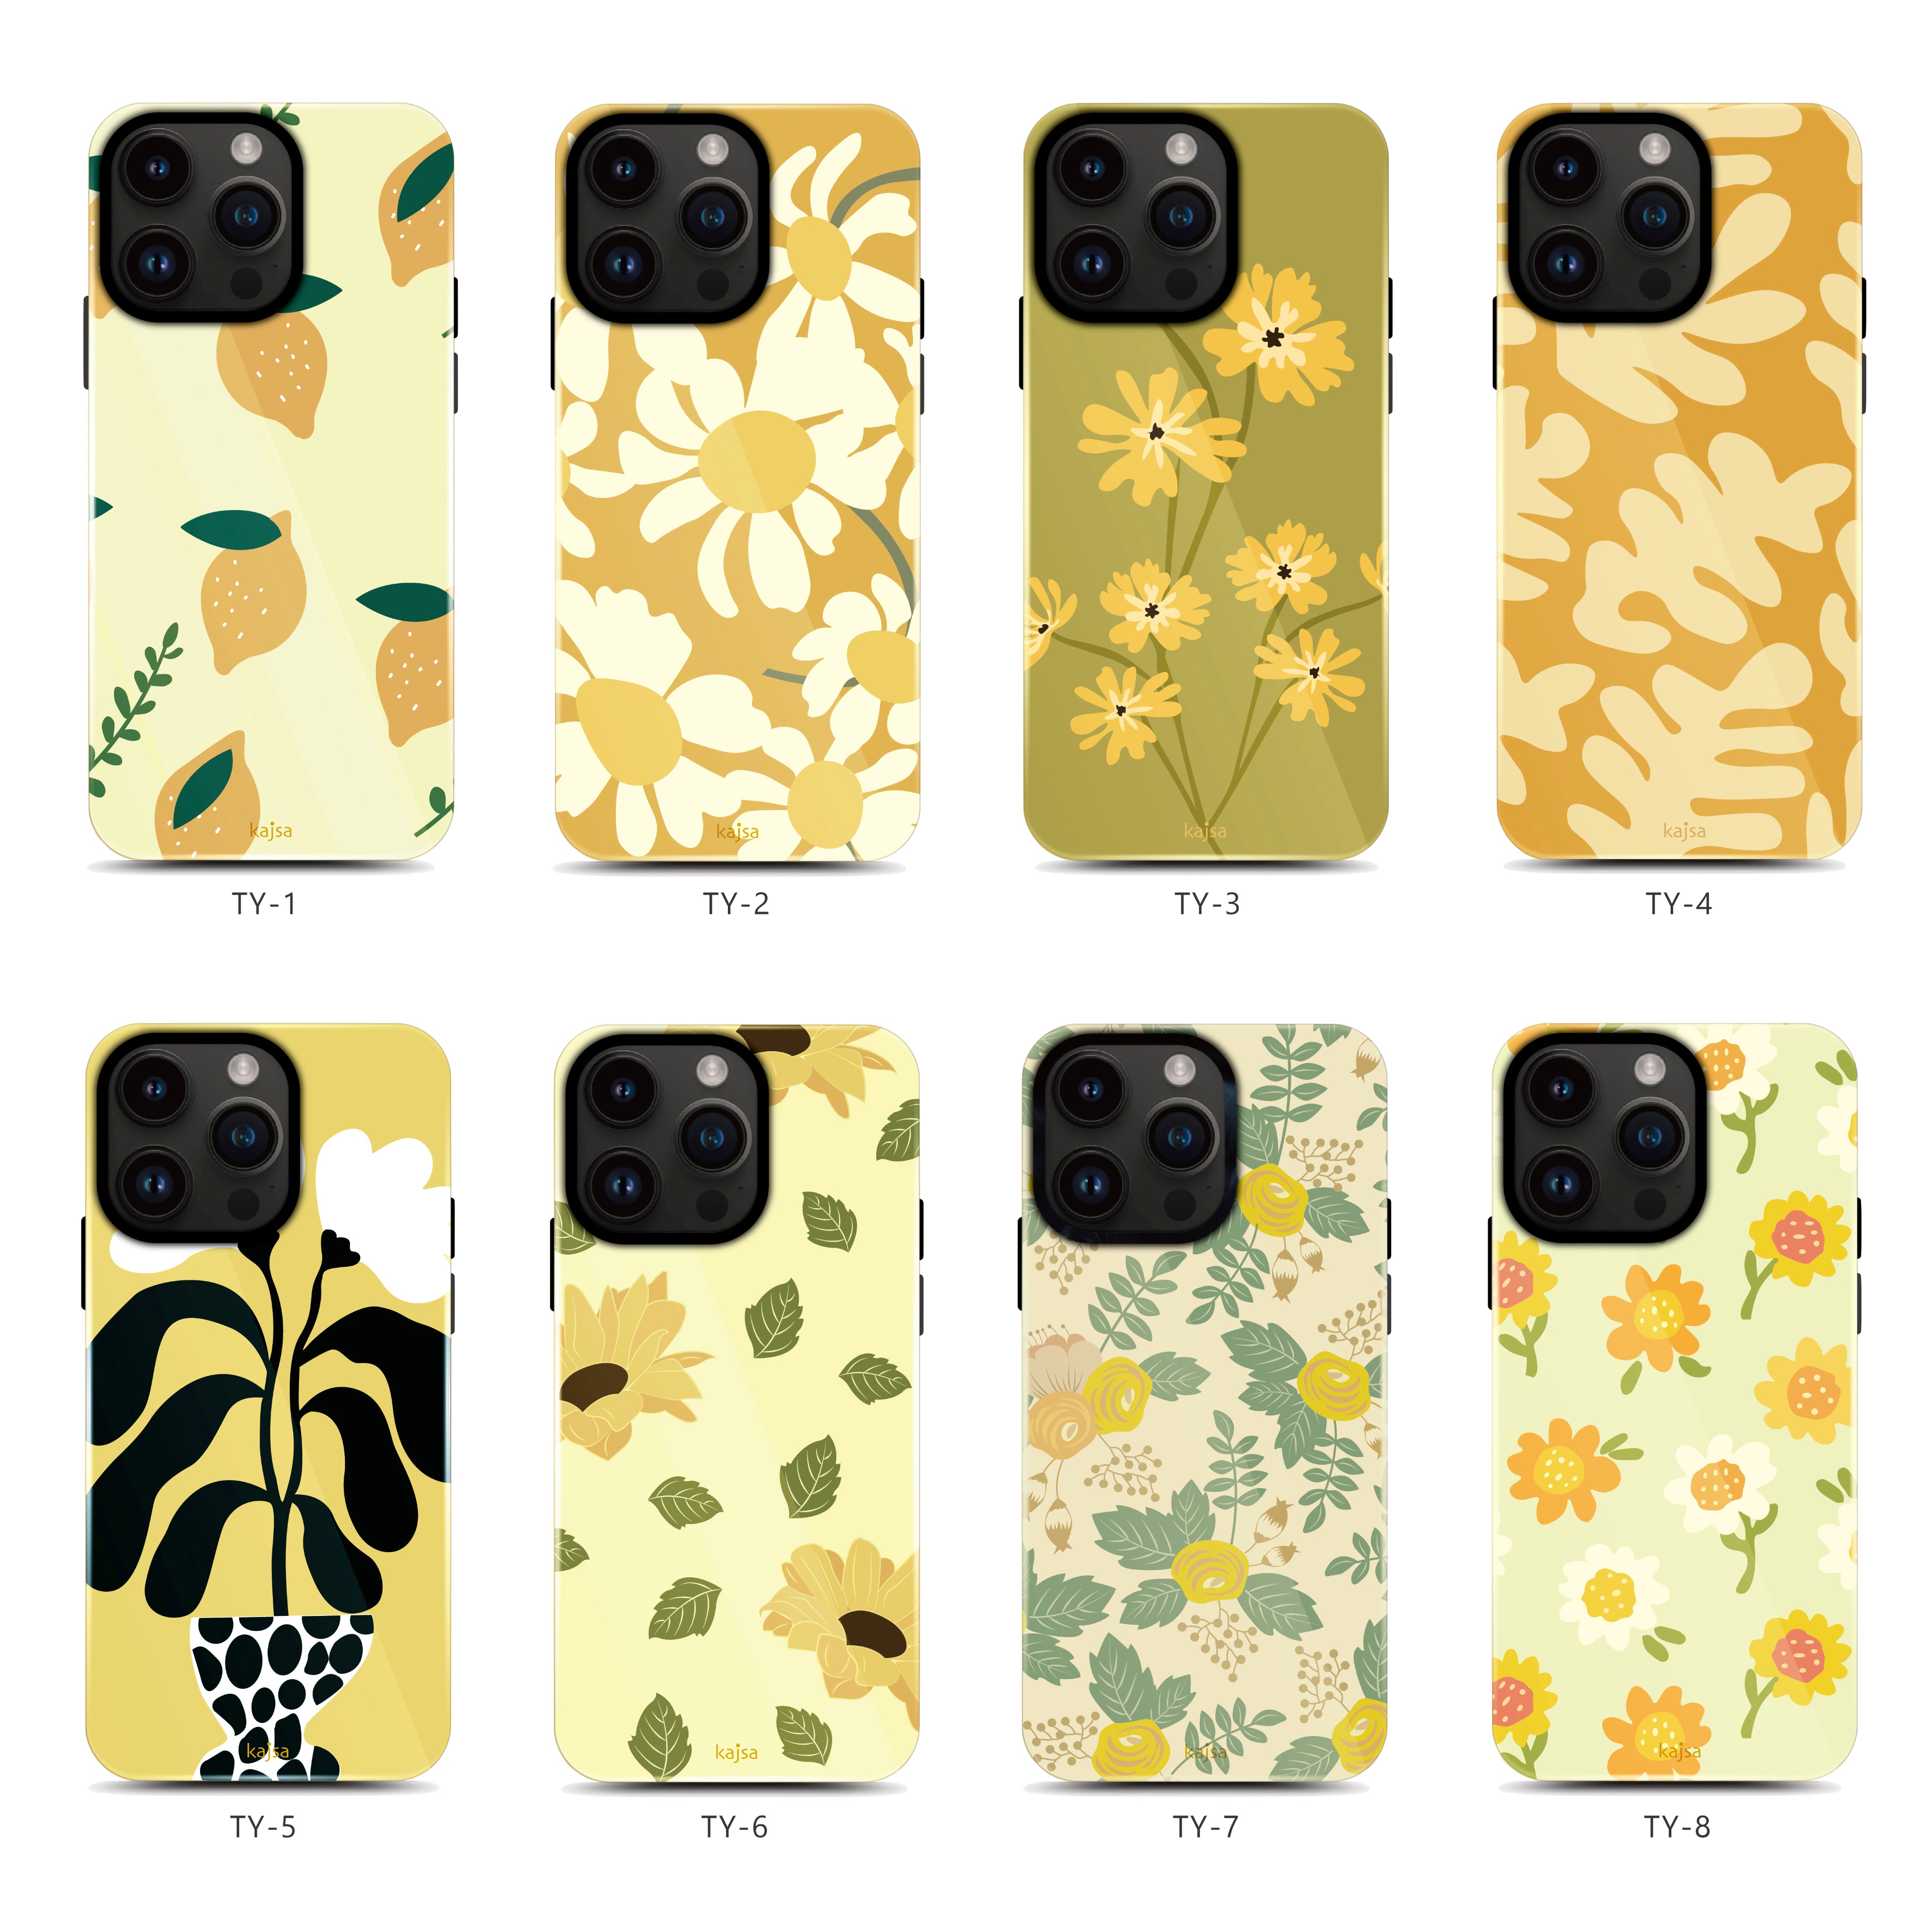 Floral Collection - Tropical Back Base for iPhone 14 (TY4)-Phone Case- phone case - phone cases- phone cover- iphone cover- iphone case- iphone cases- leather case- leather cases- DIYCASE - custom case - leather cover - hand strap case - croco pattern case - snake pattern case - carbon fiber phone case - phone case brand - unique phone case - high quality - phone case brand - protective case - buy phone case hong kong - online buy phone case - iphone‎手機殼 - 客製化手機殼 - samsung ‎手機殼 - 香港手機殼 - 買電話殼